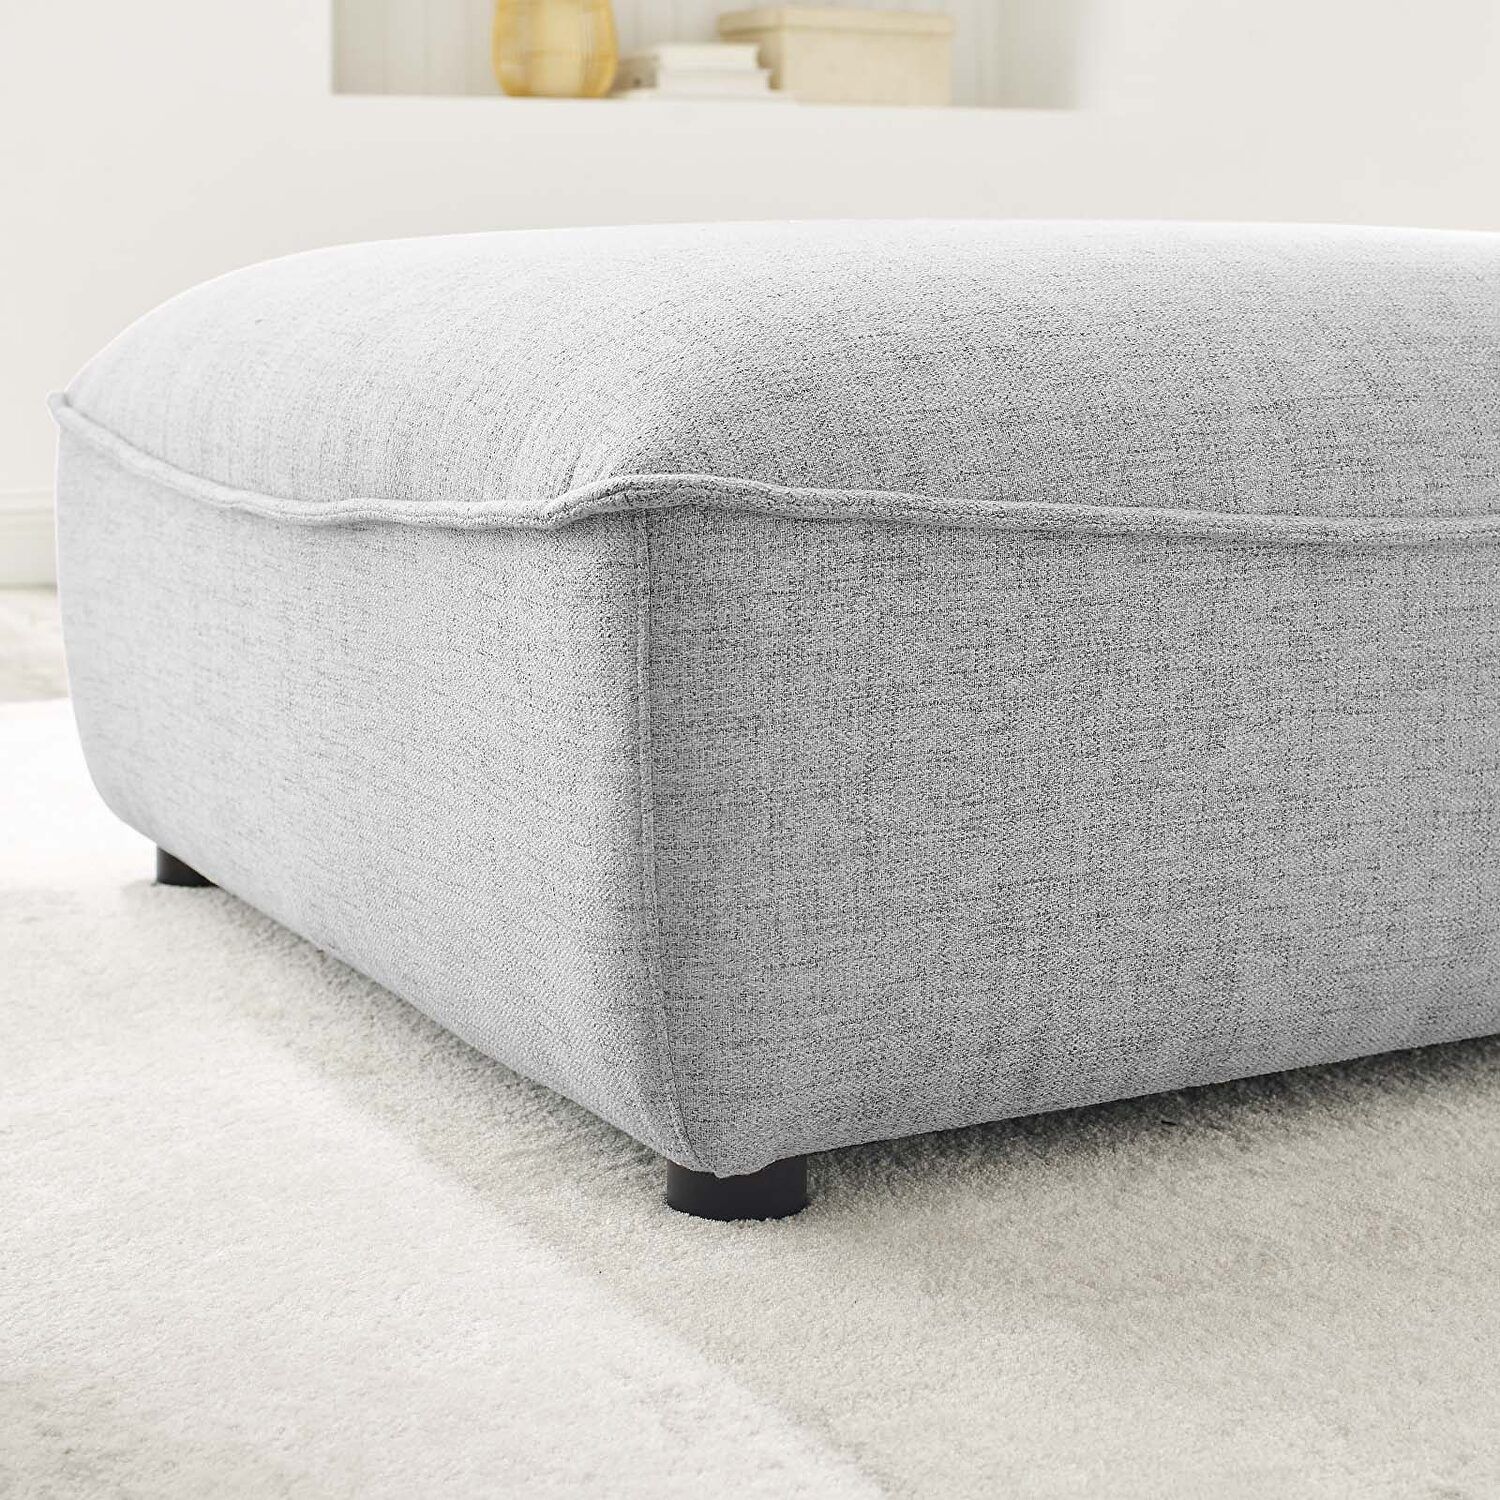 Modway Comprise Light Gray Ottoman Eei 4419 Lgr | Comfyco Throughout Upholstery Soft Silver Ottomans (View 6 of 15)